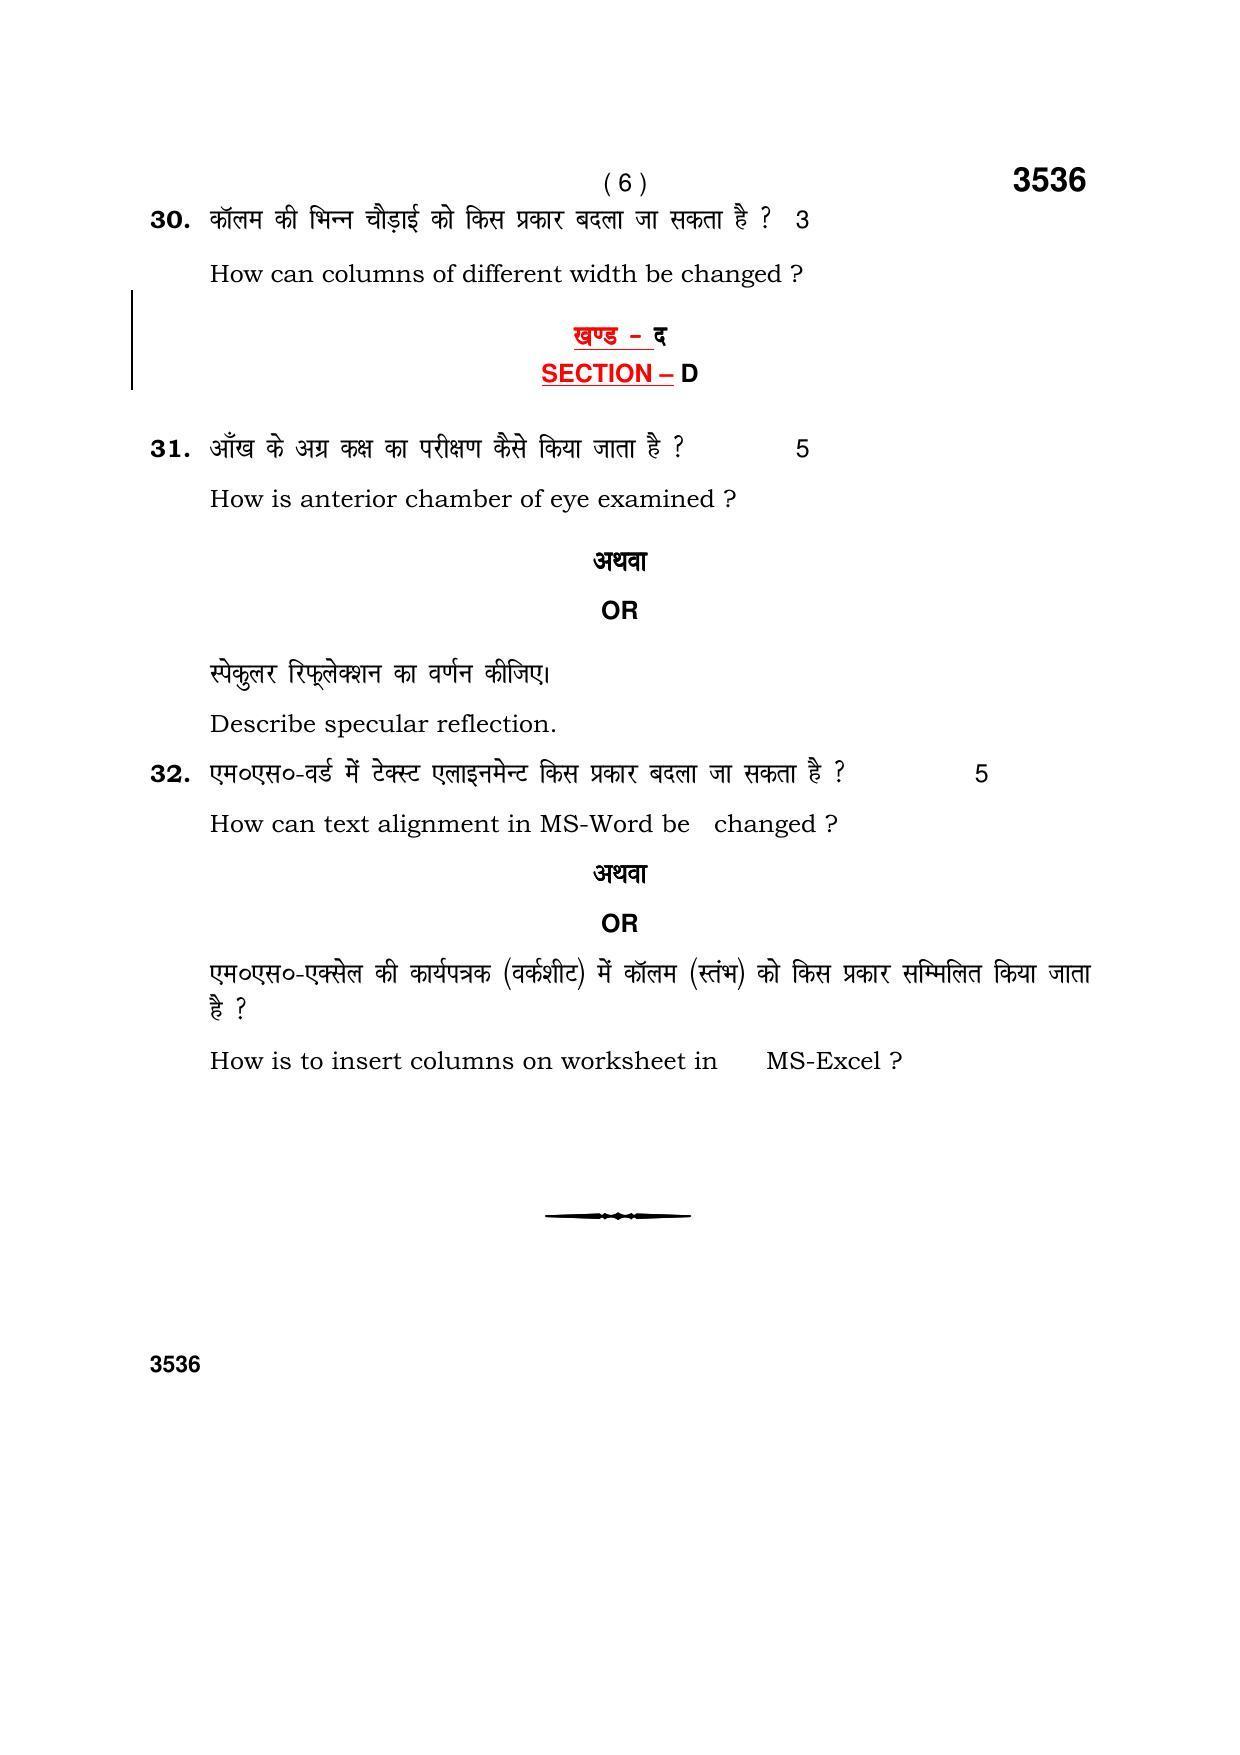 Haryana Board HBSE Class 10 Vision Technician 2018 Question Paper - Page 6